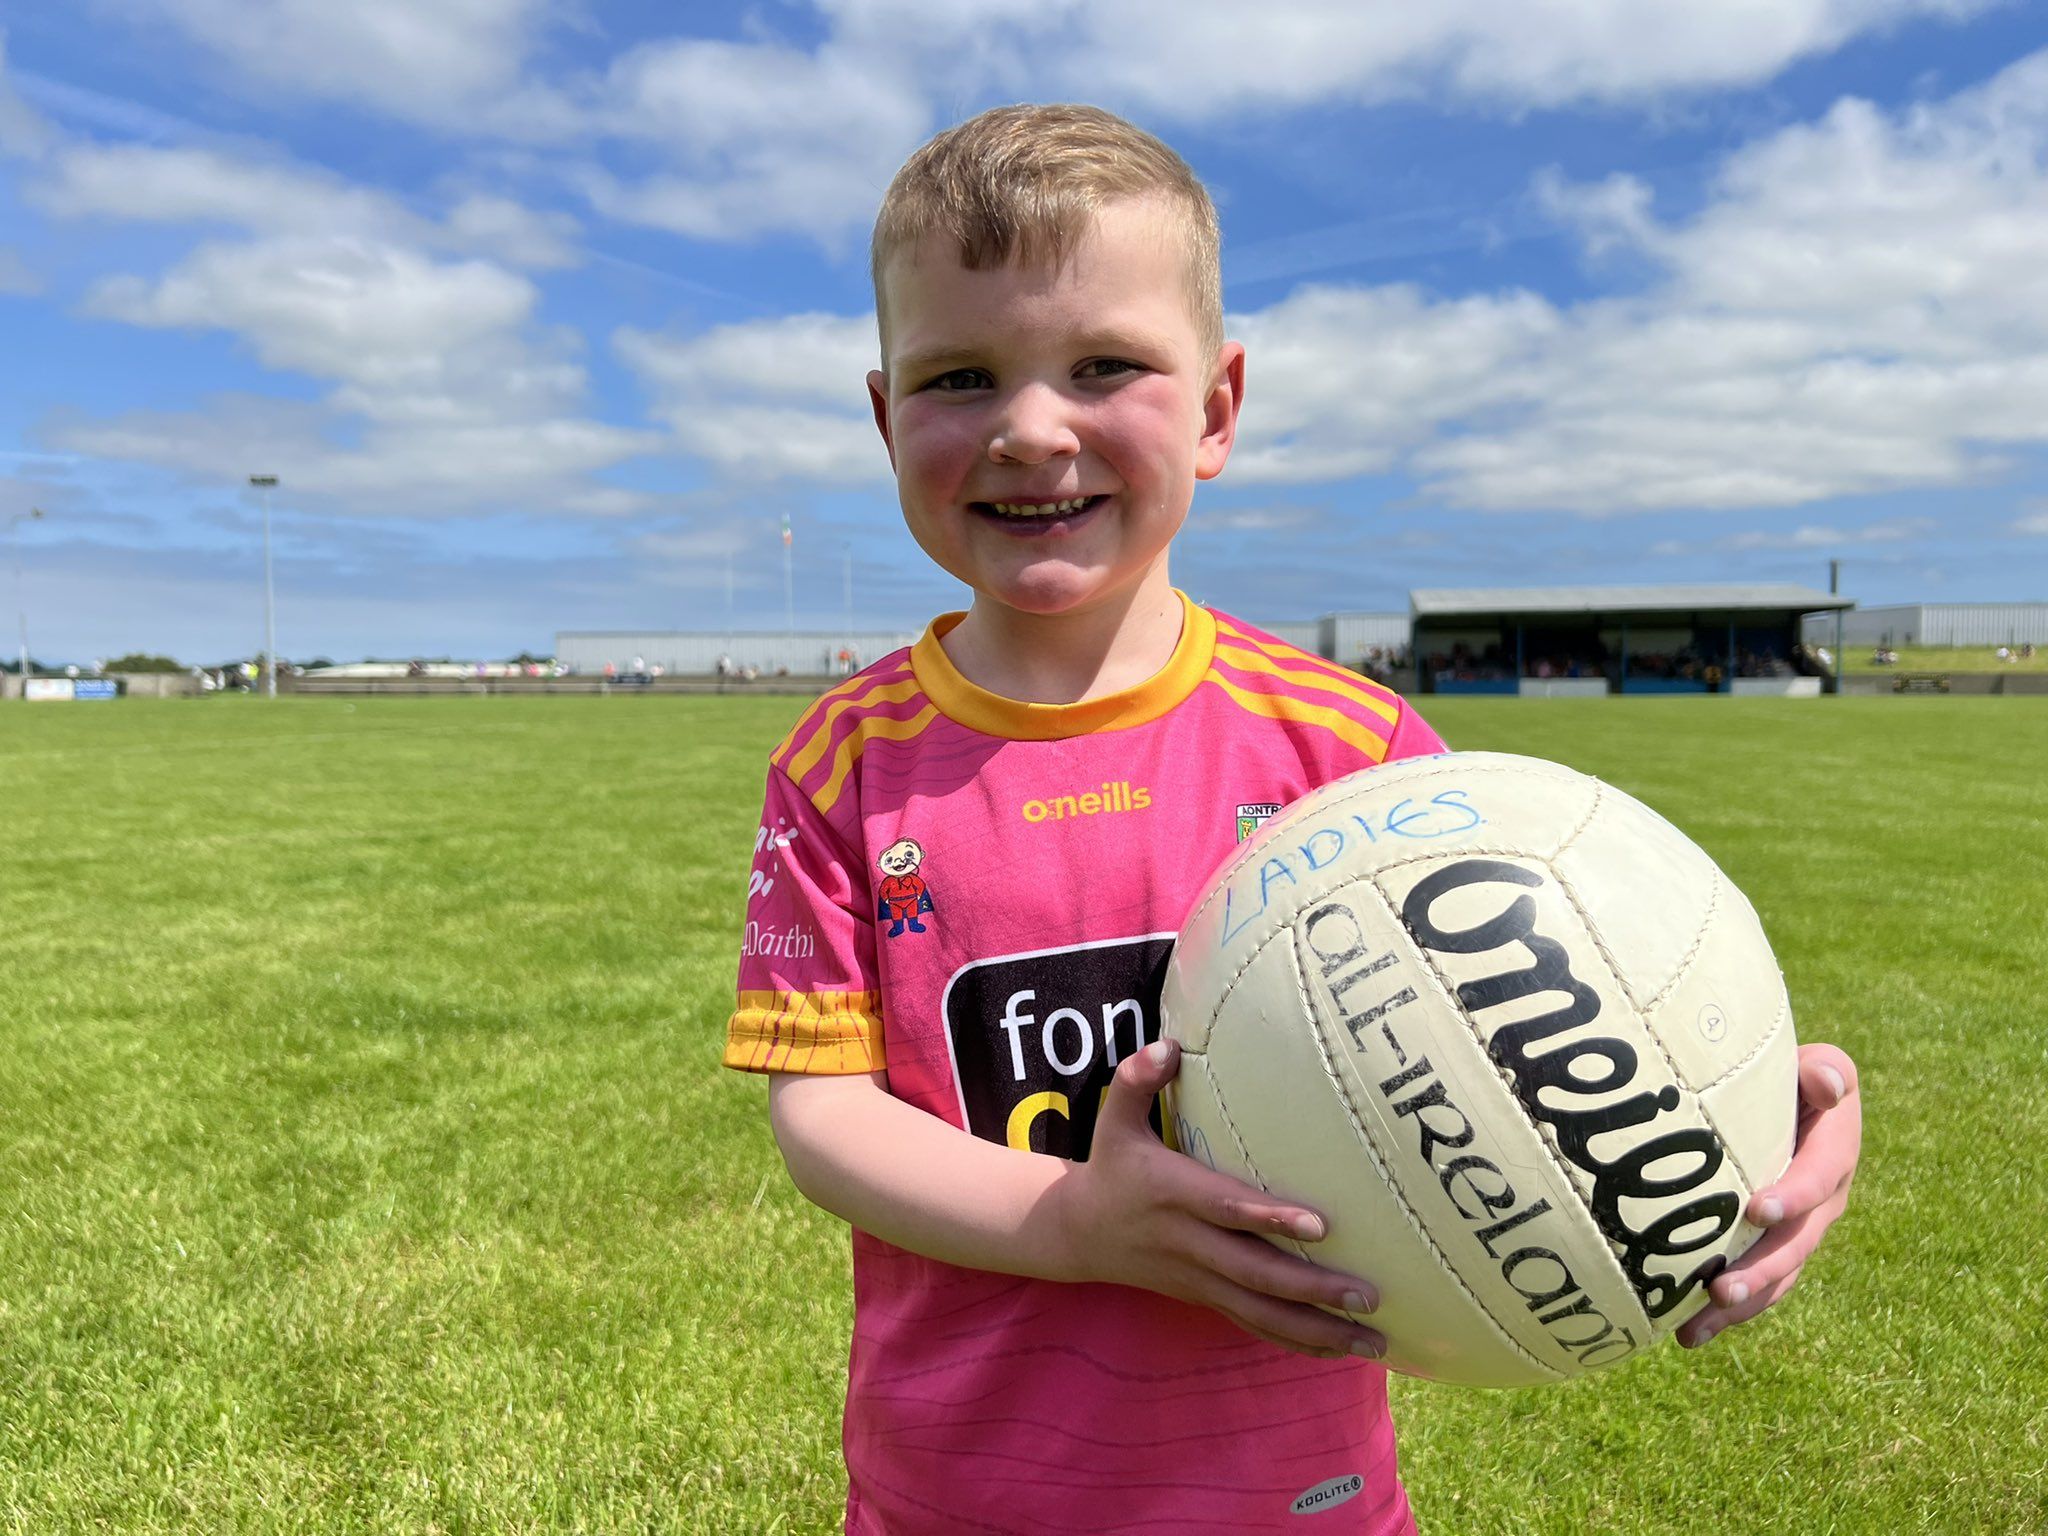 LONG WAIT: Dáithí Mac Gabhann spent his 1500th day on the organ donation list watching Antrim Ladies Footballers defeat Carlow in the All-Ireland semi final 